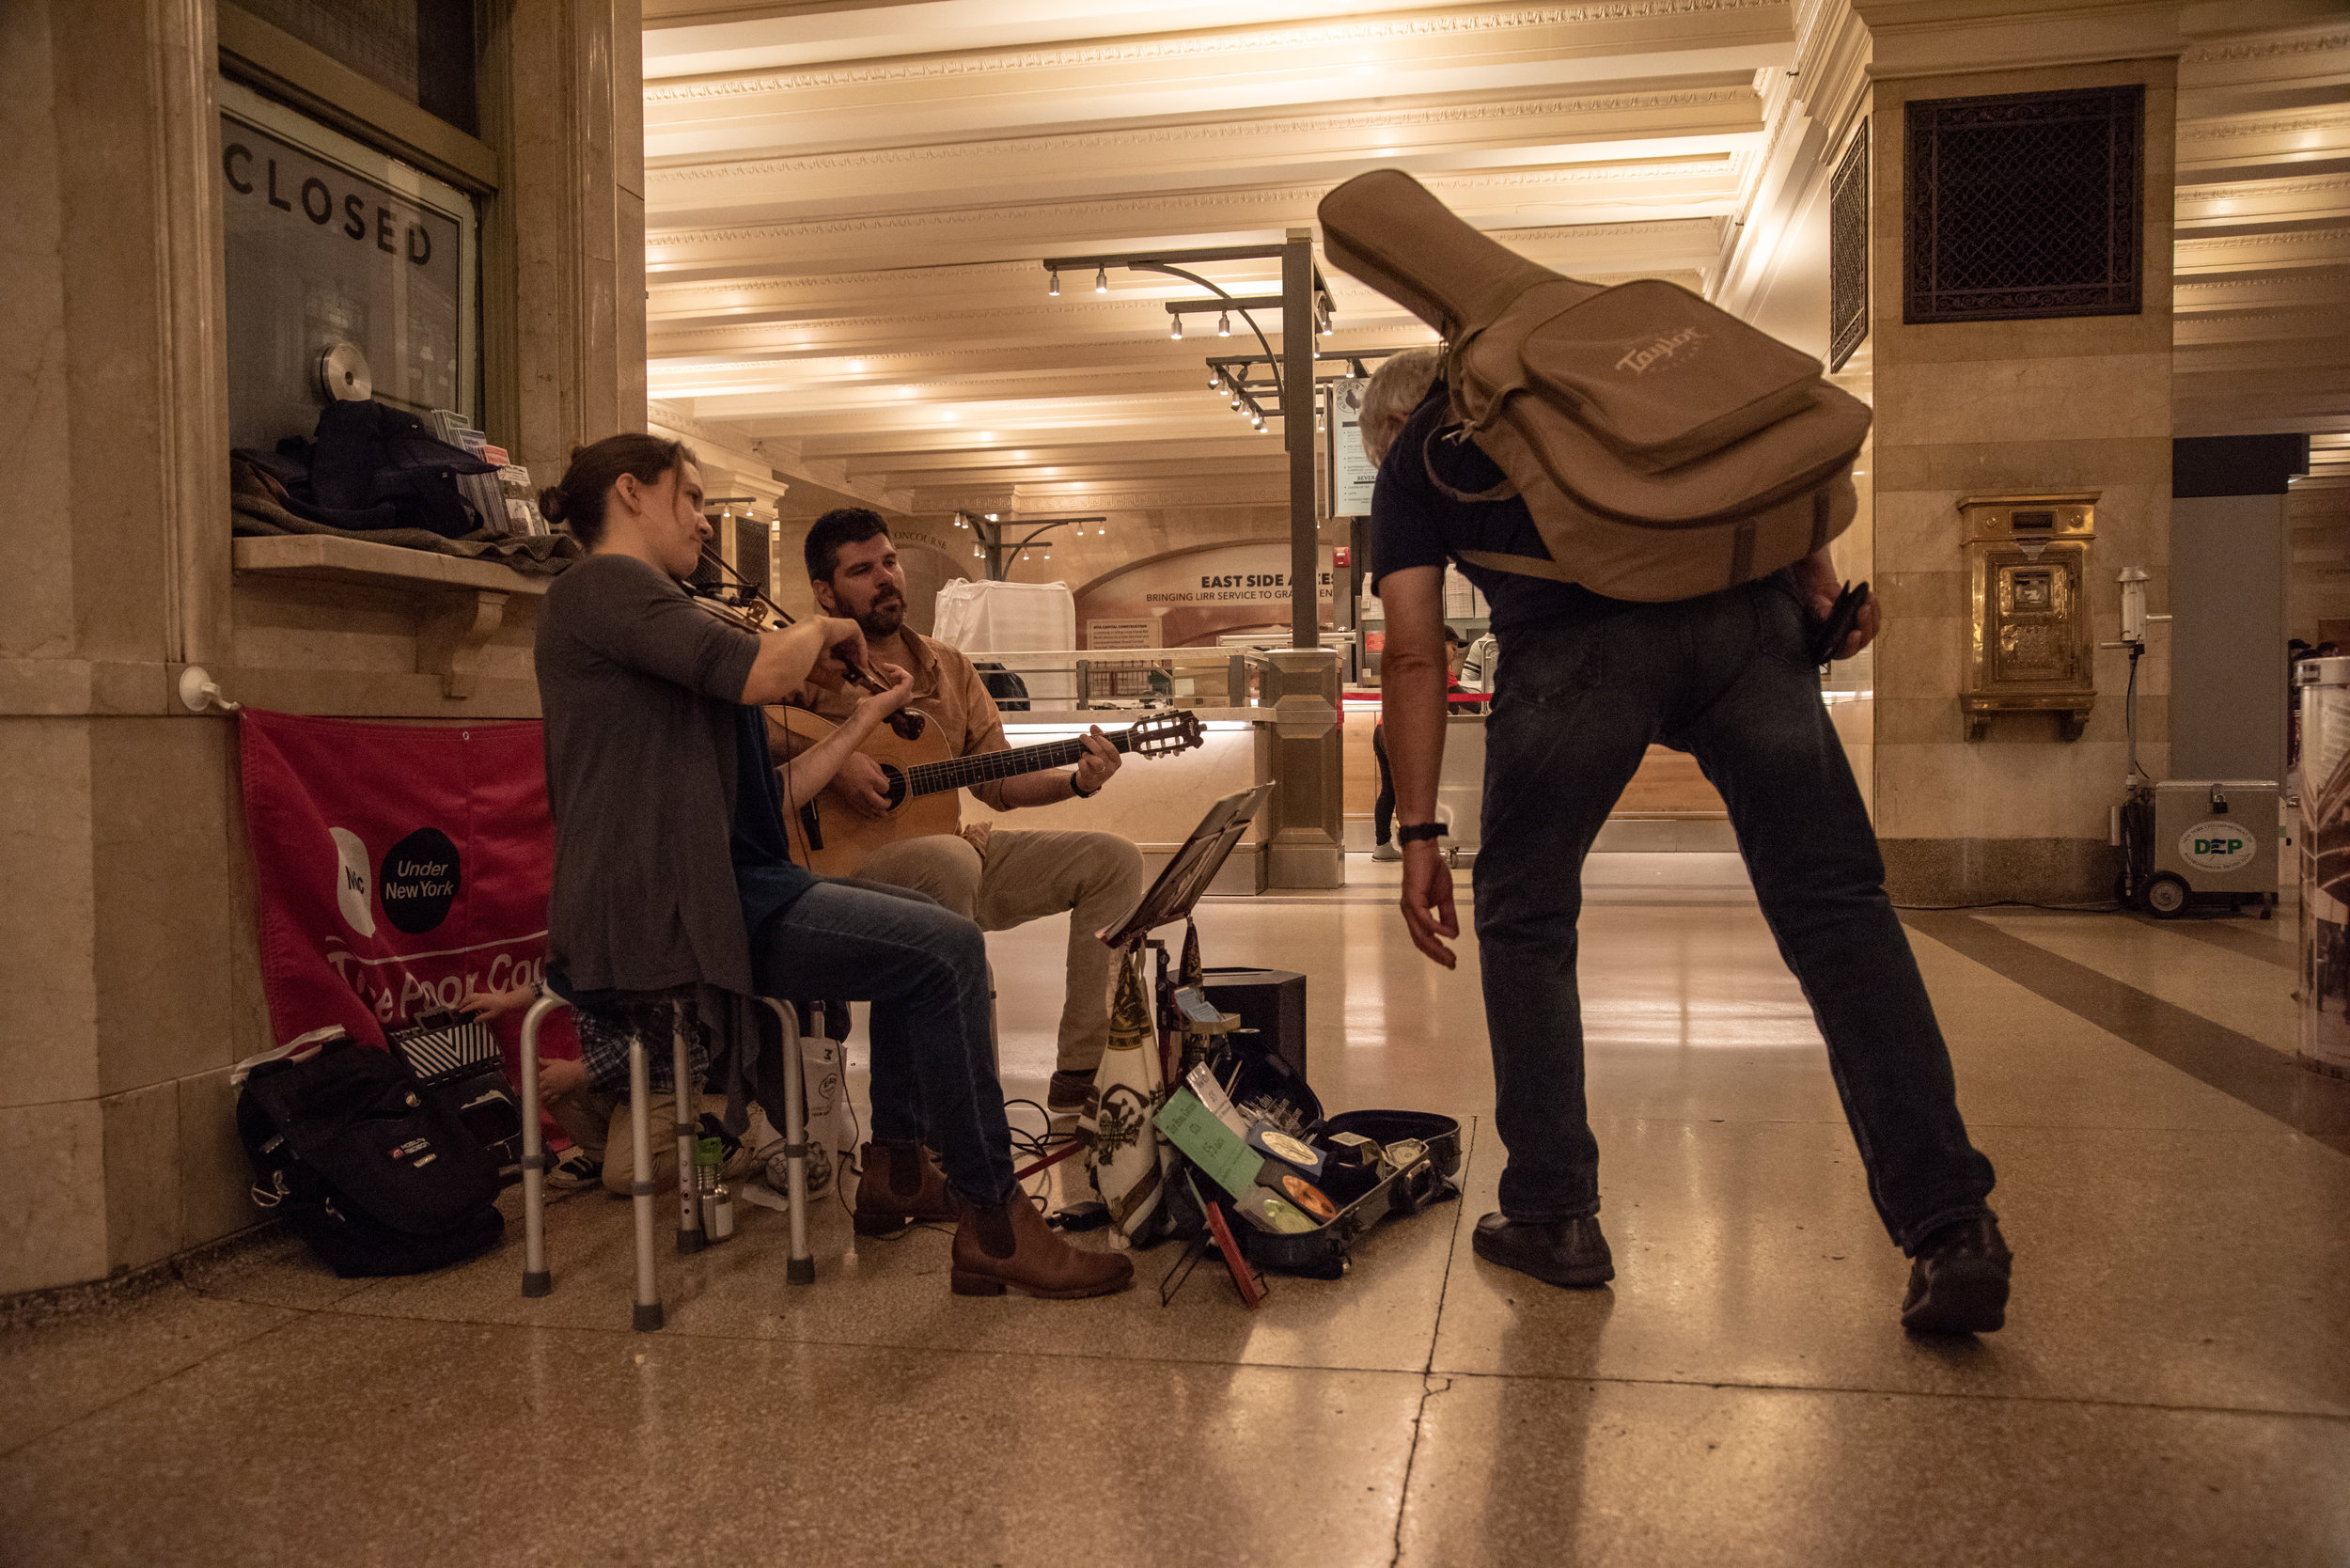  Busking means they are only paid what they earn from tips and CD sales. 